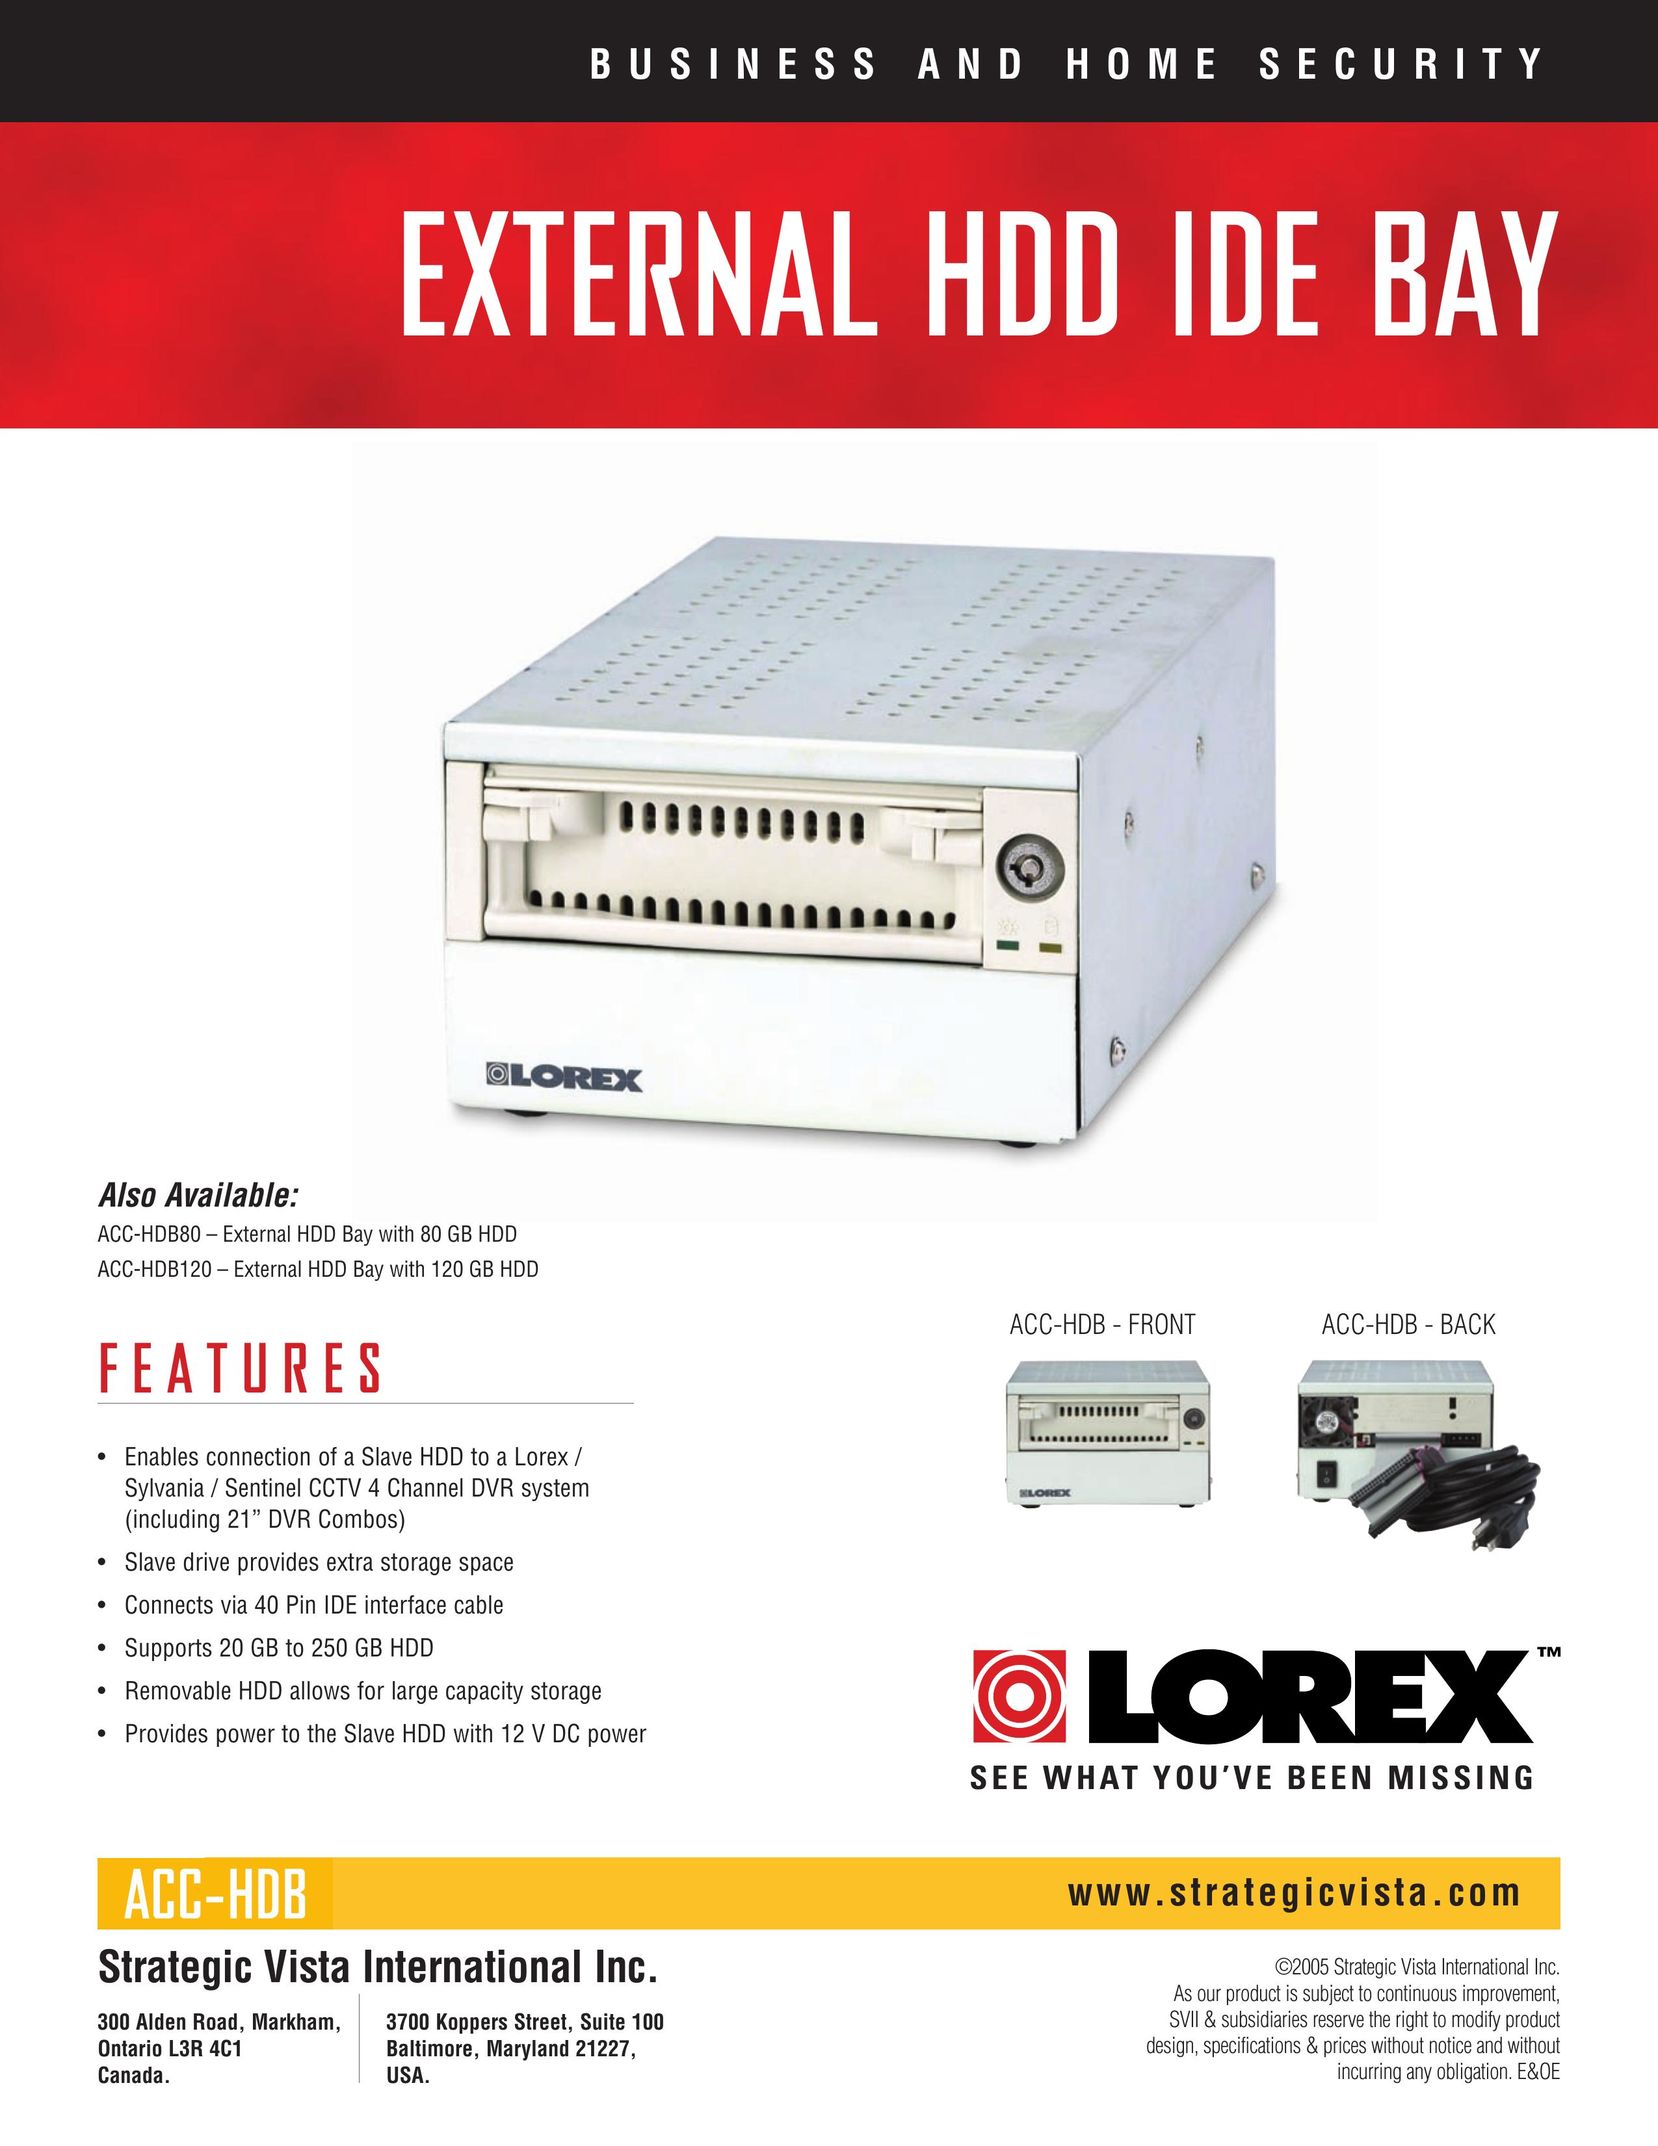 LOREX Technology ACC-HDB - FRONT Home Security System User Manual